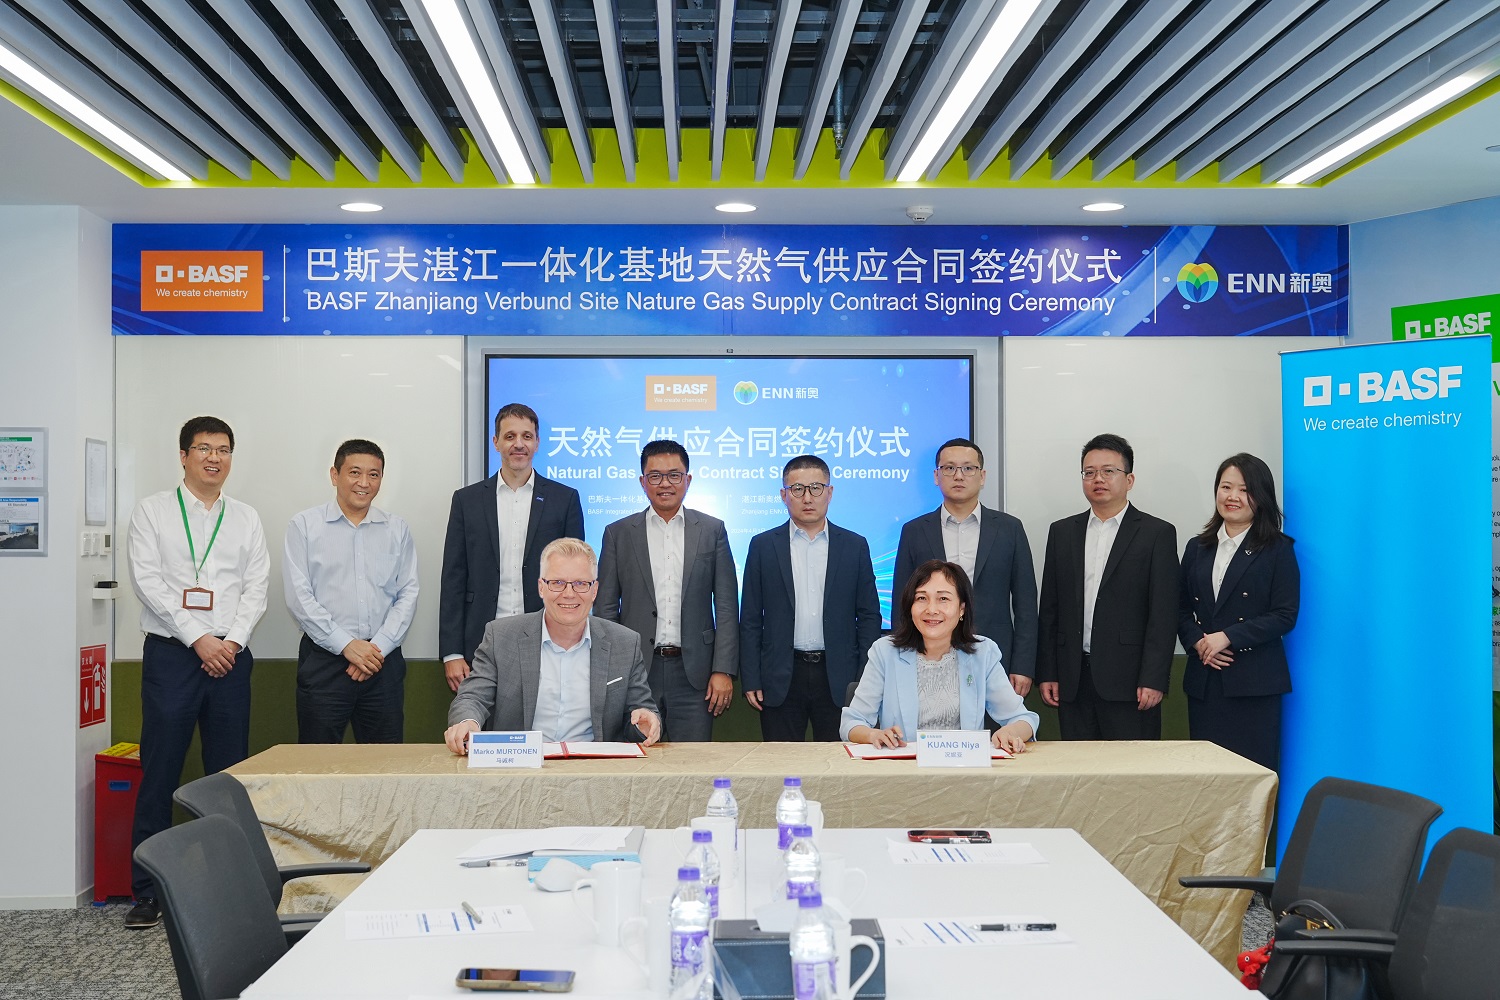 BASF signed a 15-year contract with ENN Energy to purchase natural gas for its Zhanjiang Verbund site.jpg